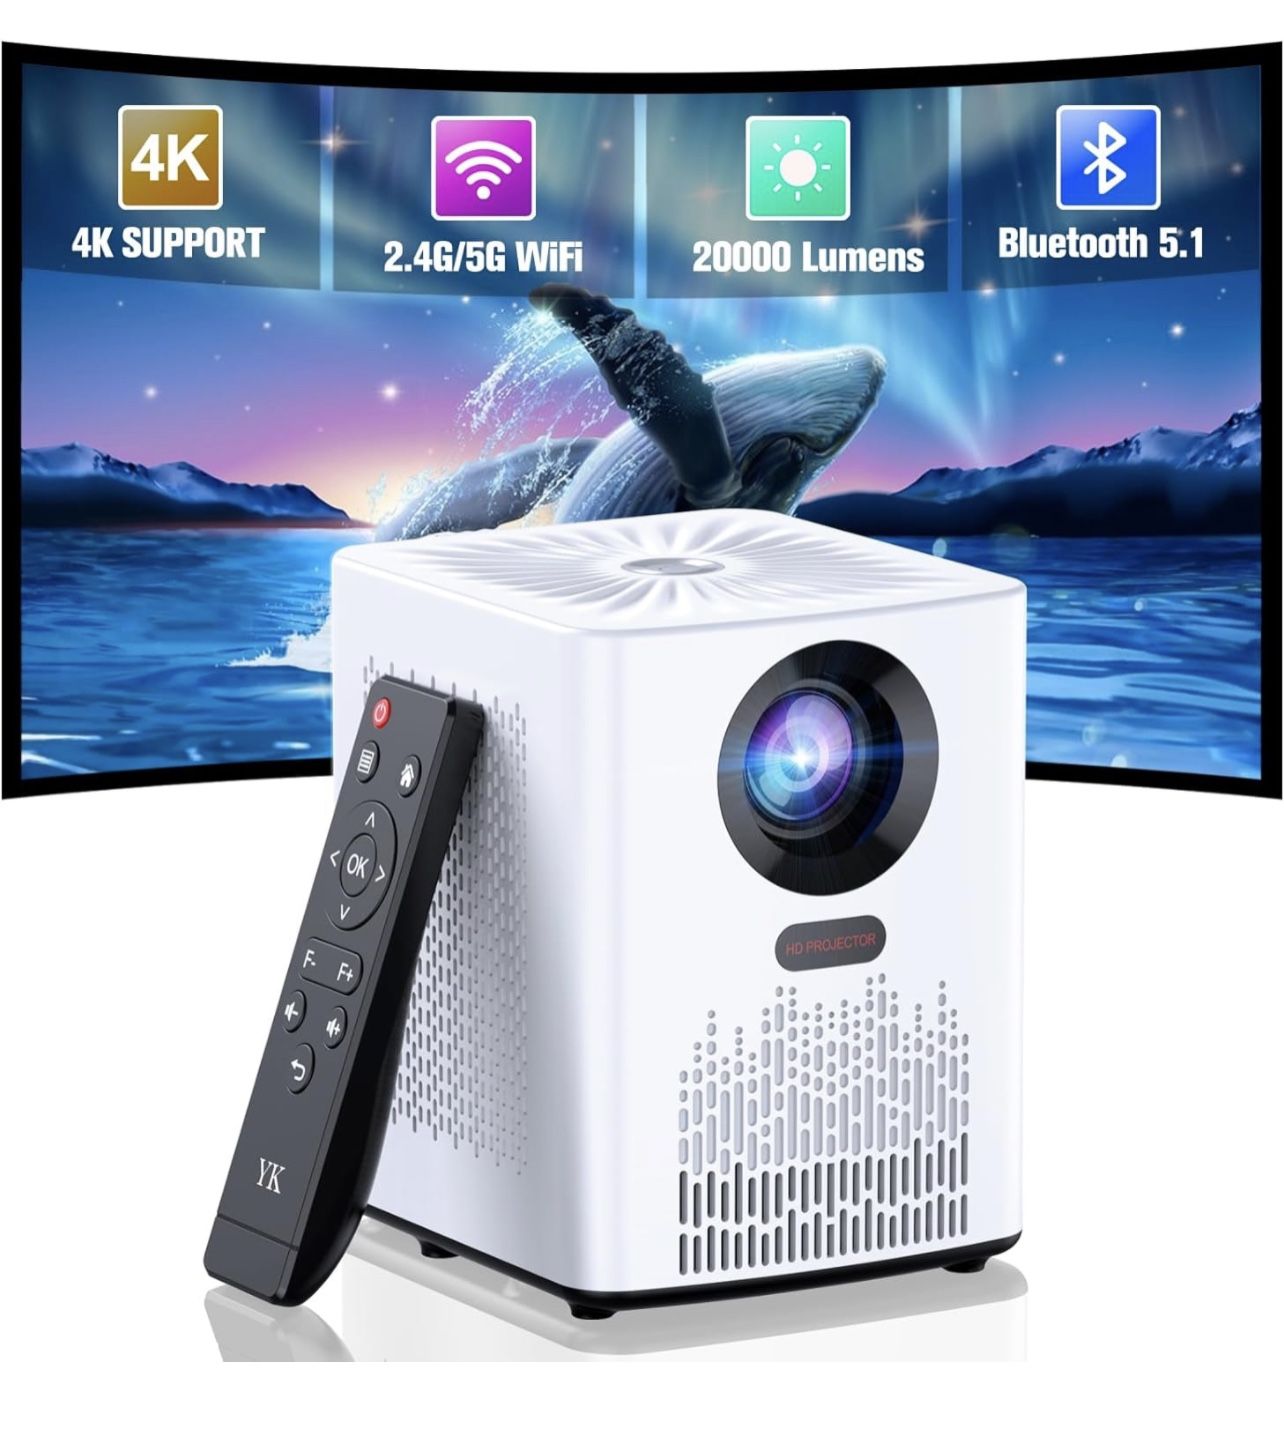 😲🔥Hivvtui Projector with WiFi and Bluetooth🔥🔥 $40 